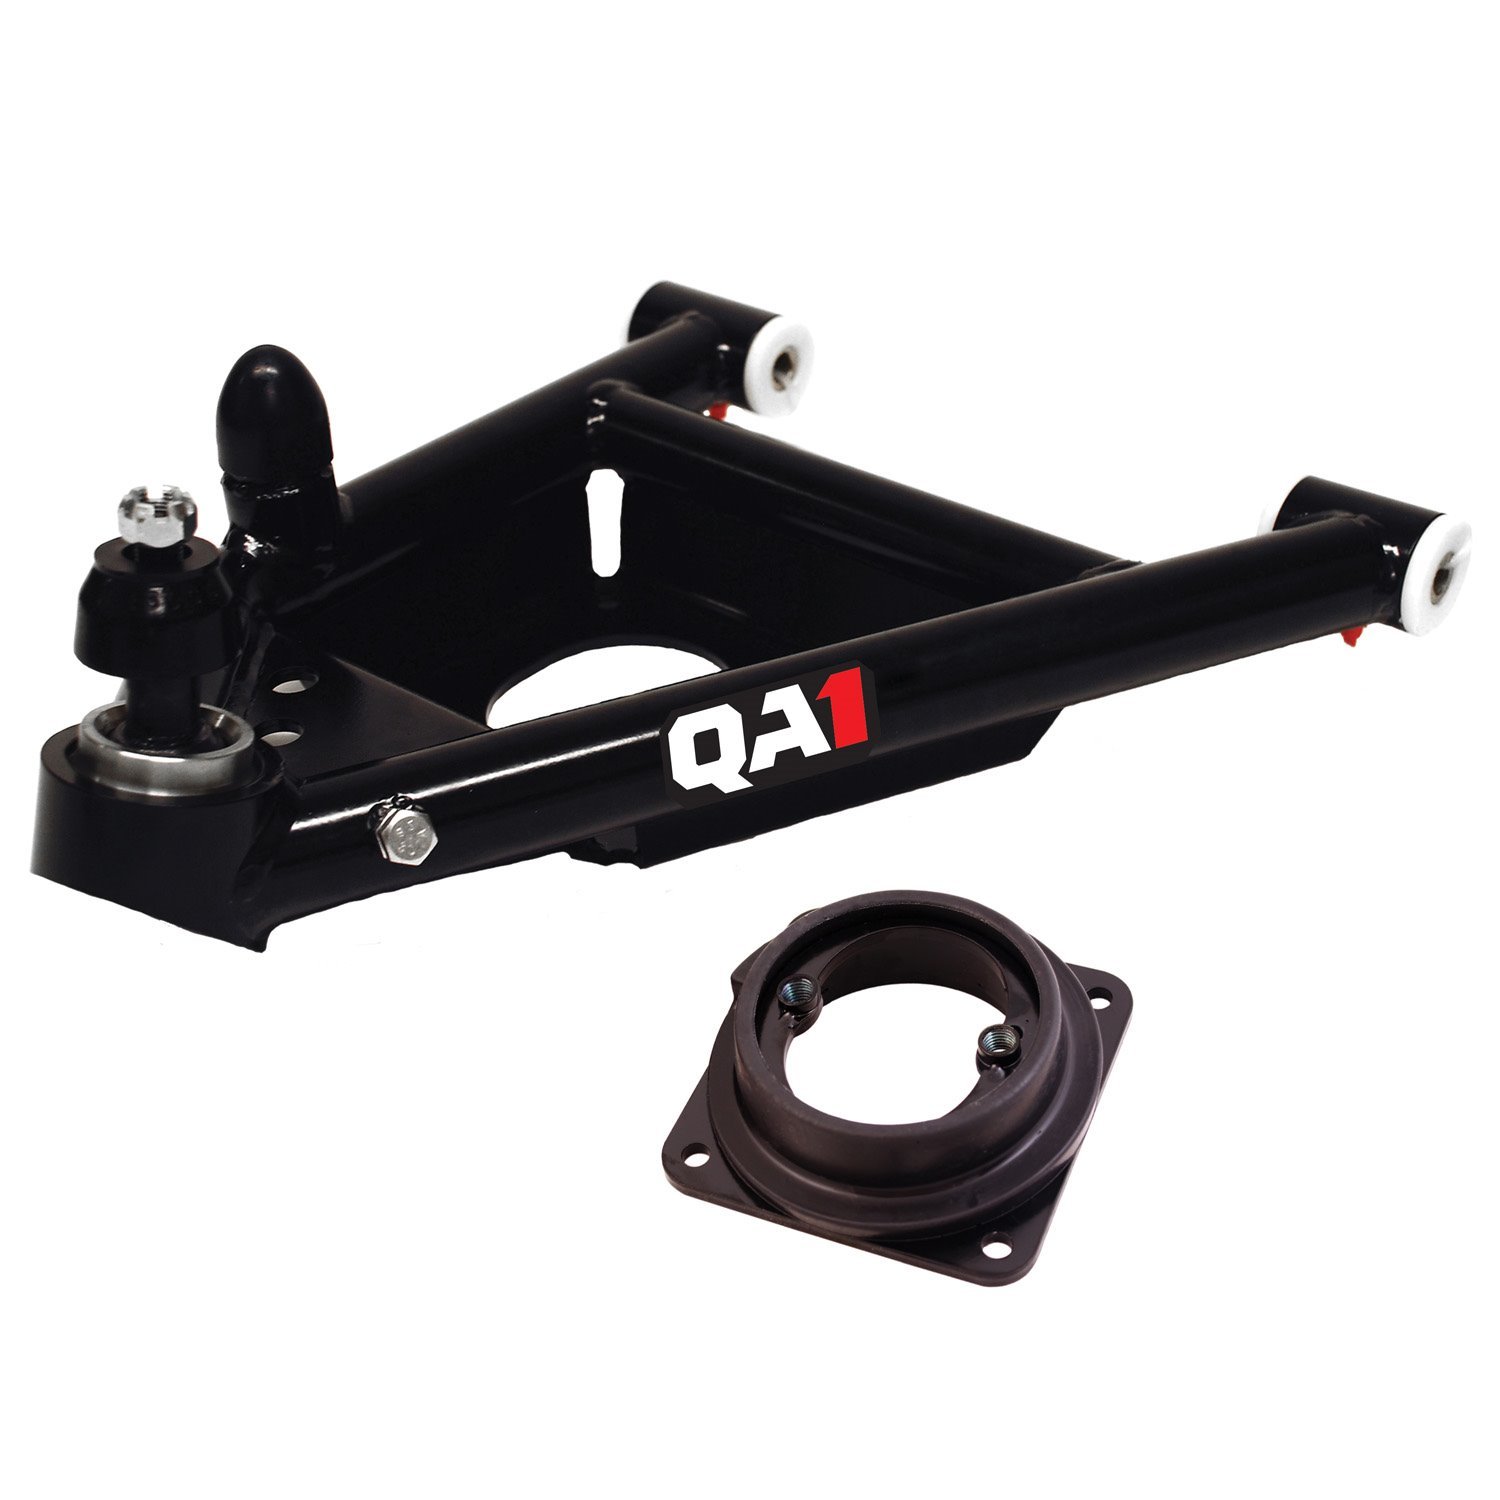 Race Lower Control Arms for 1982-1992 GM F-Body